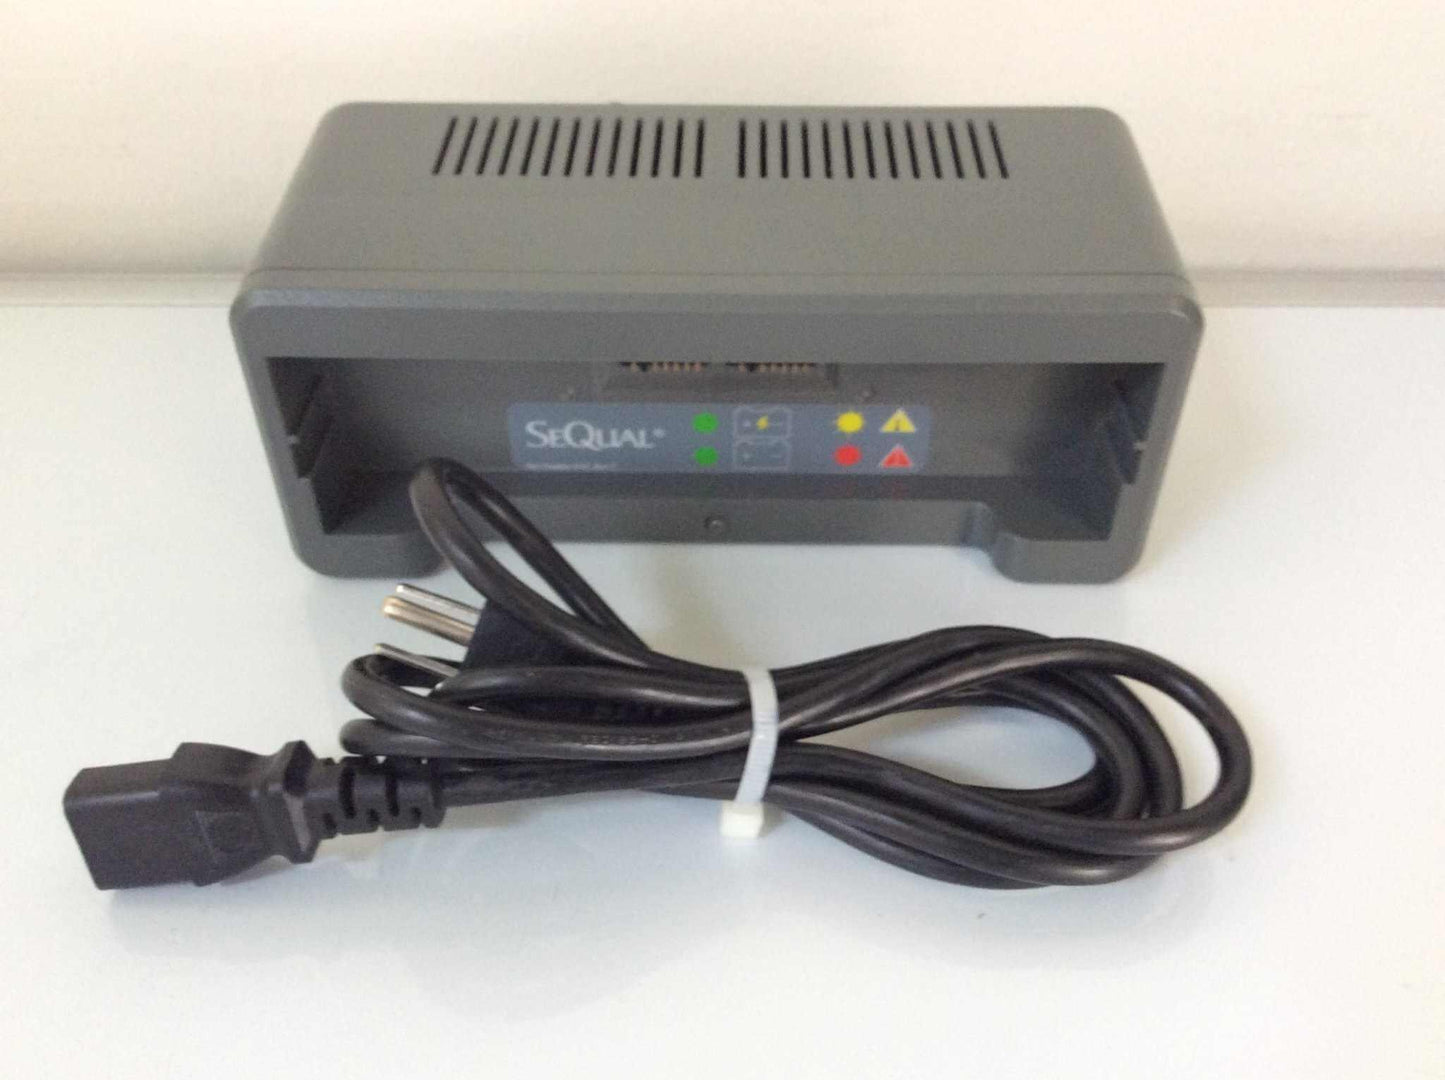 USED SeQual Eclipse Desktop External Battery Charger with Cord 3823 4162 4163 Warranty FREE Shipping - MBR Medicals